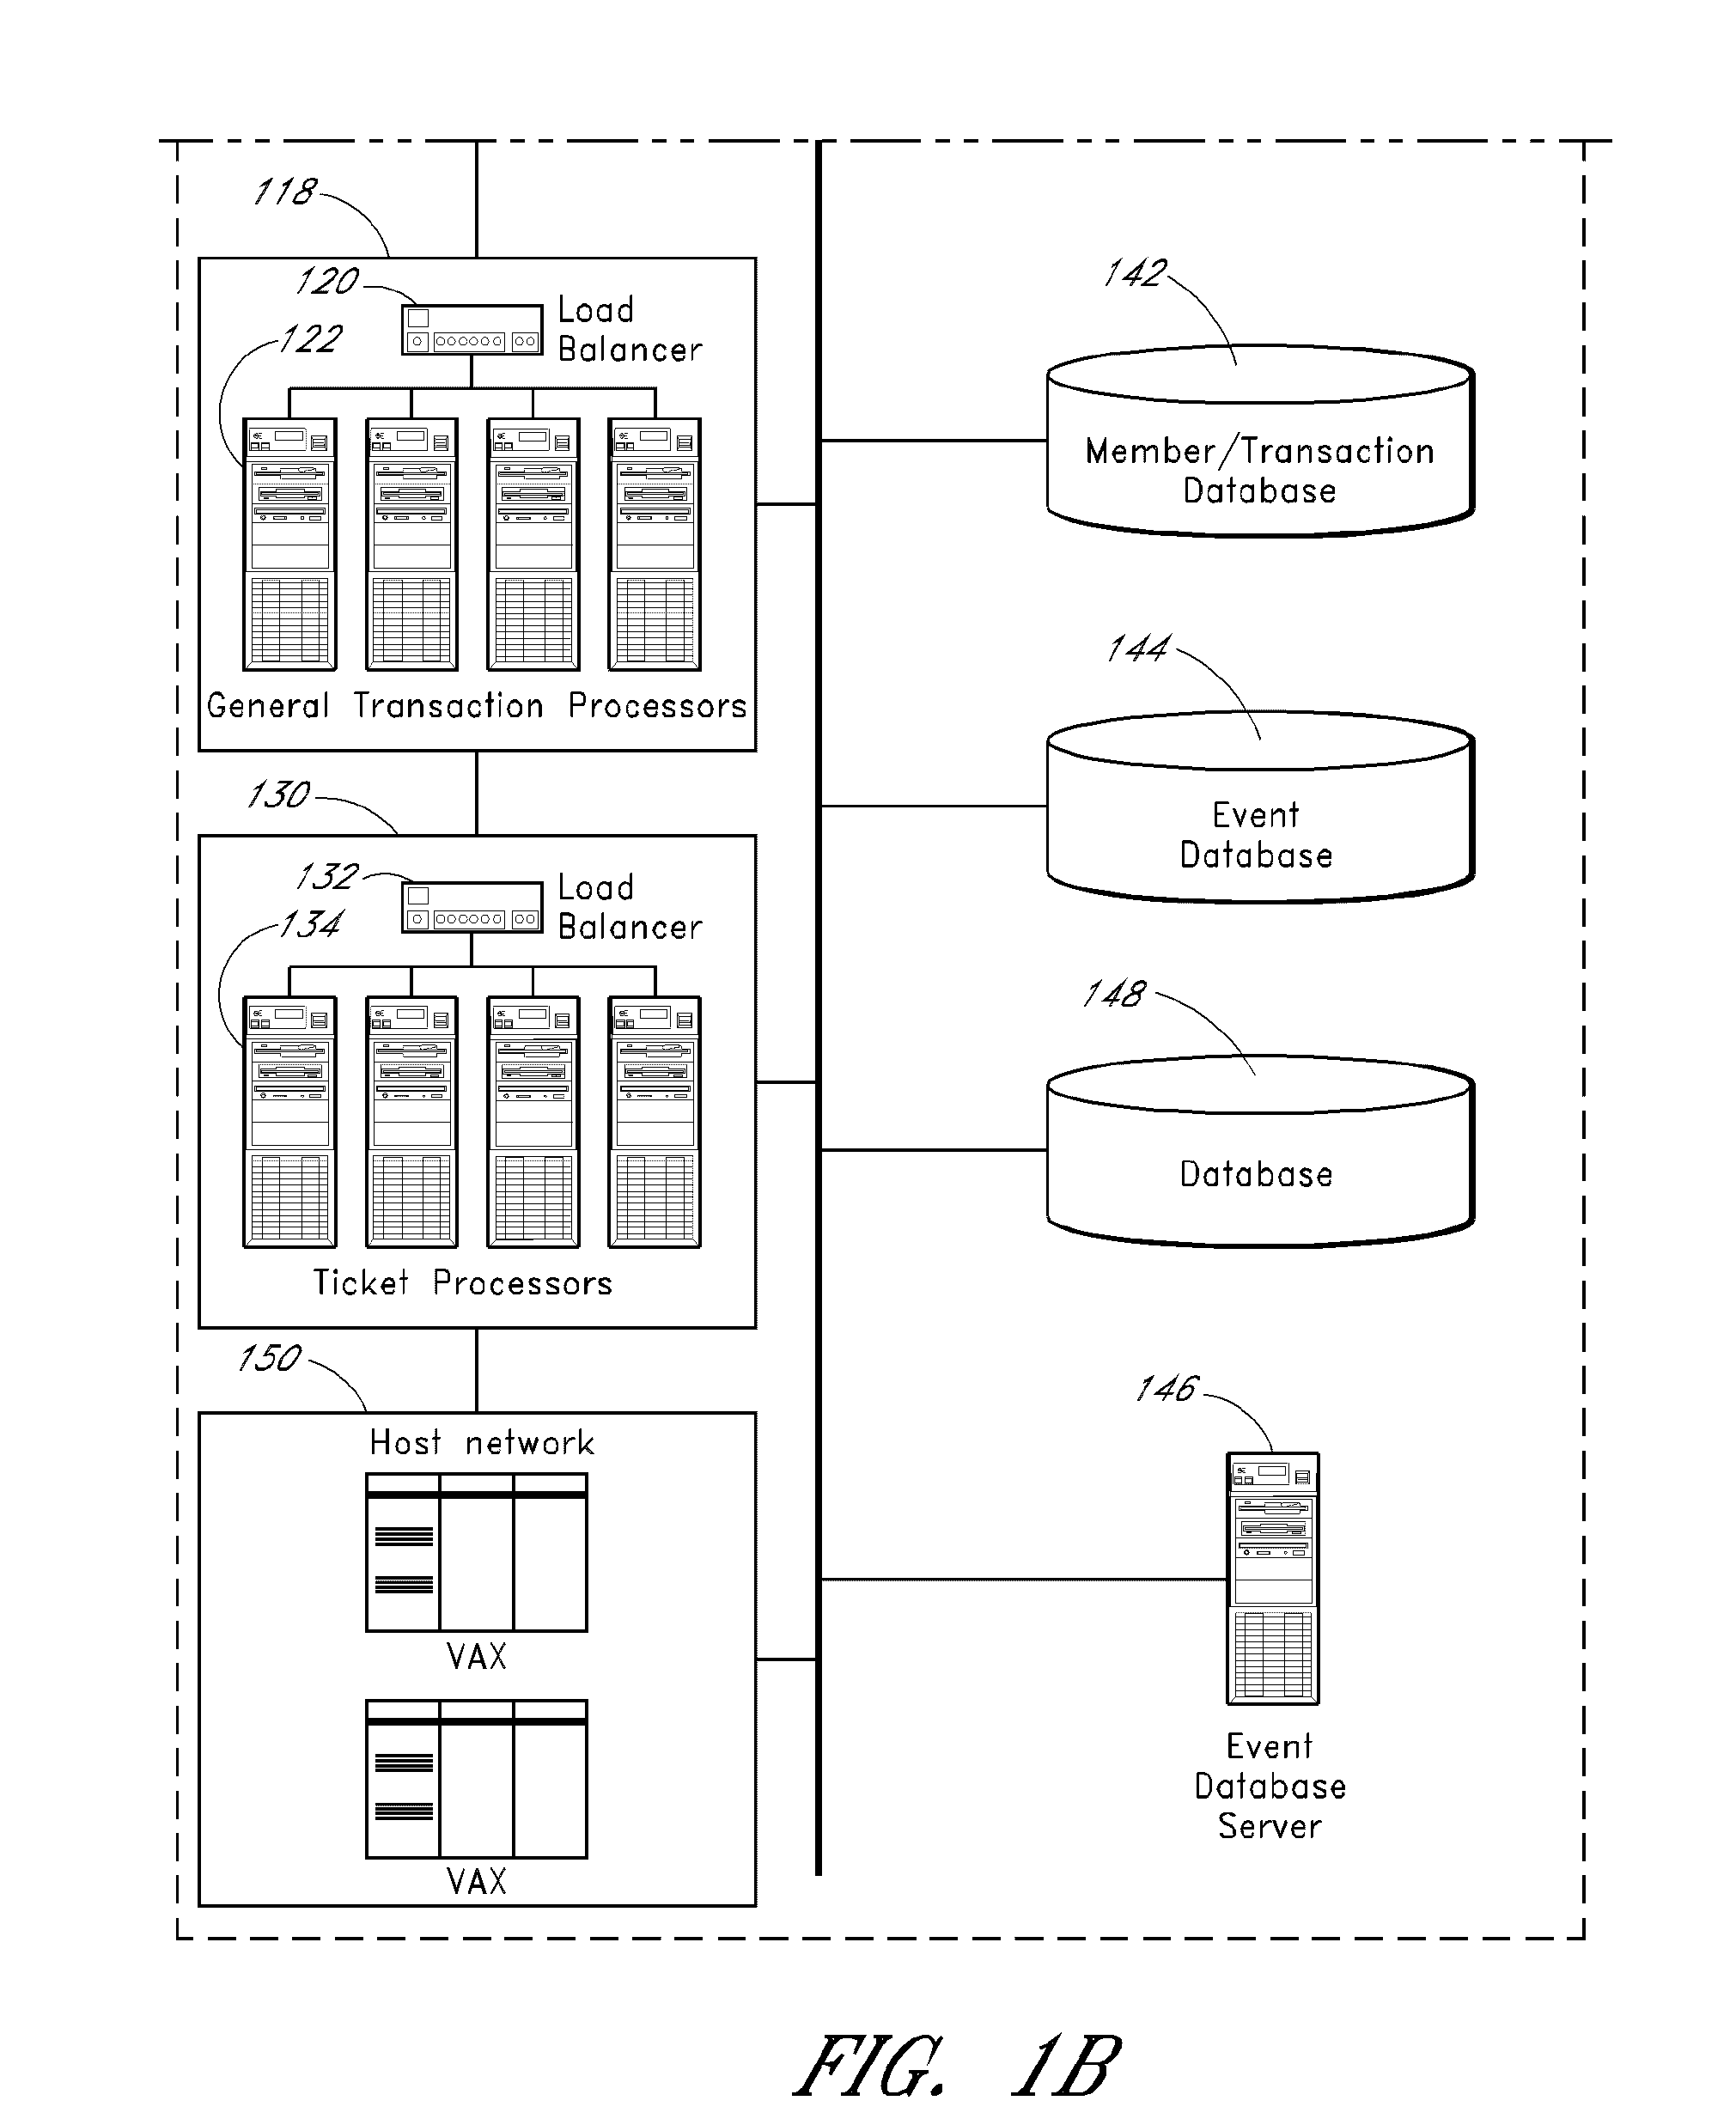 Systems and methods for providing resource allocation in a networked environment